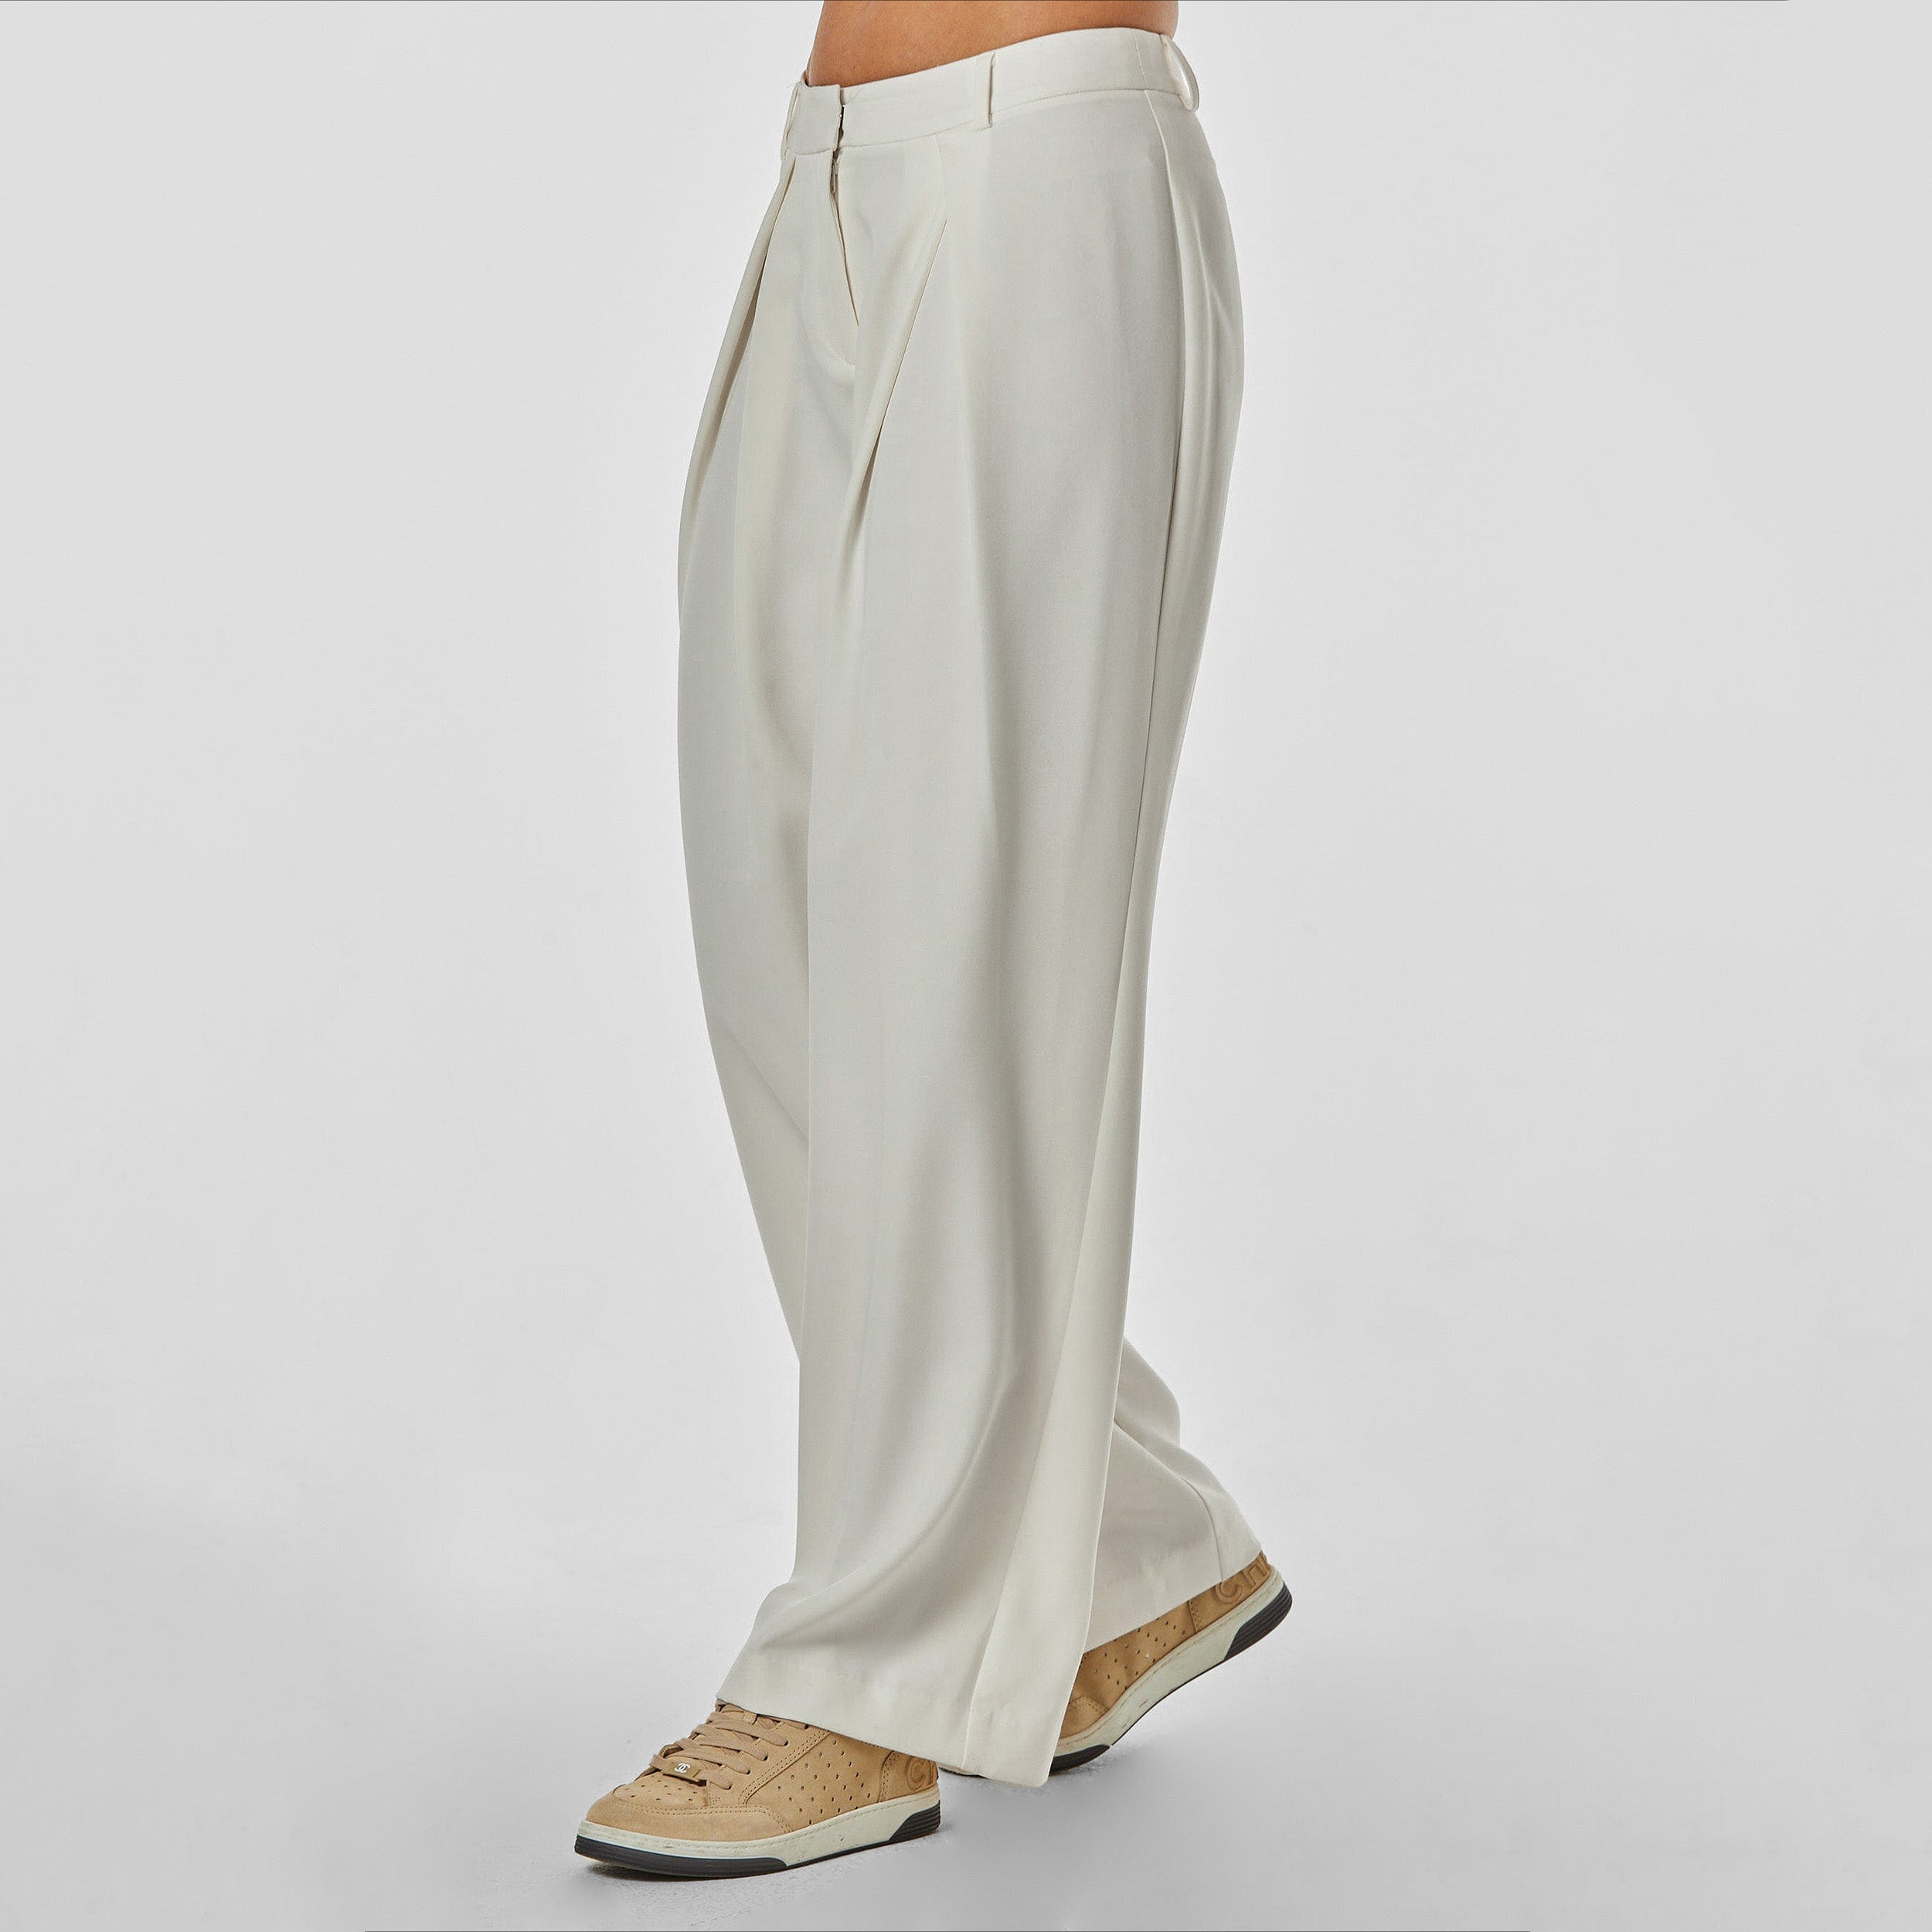 Side view of woman wearing pleated cream colored trousers with stretch fabric